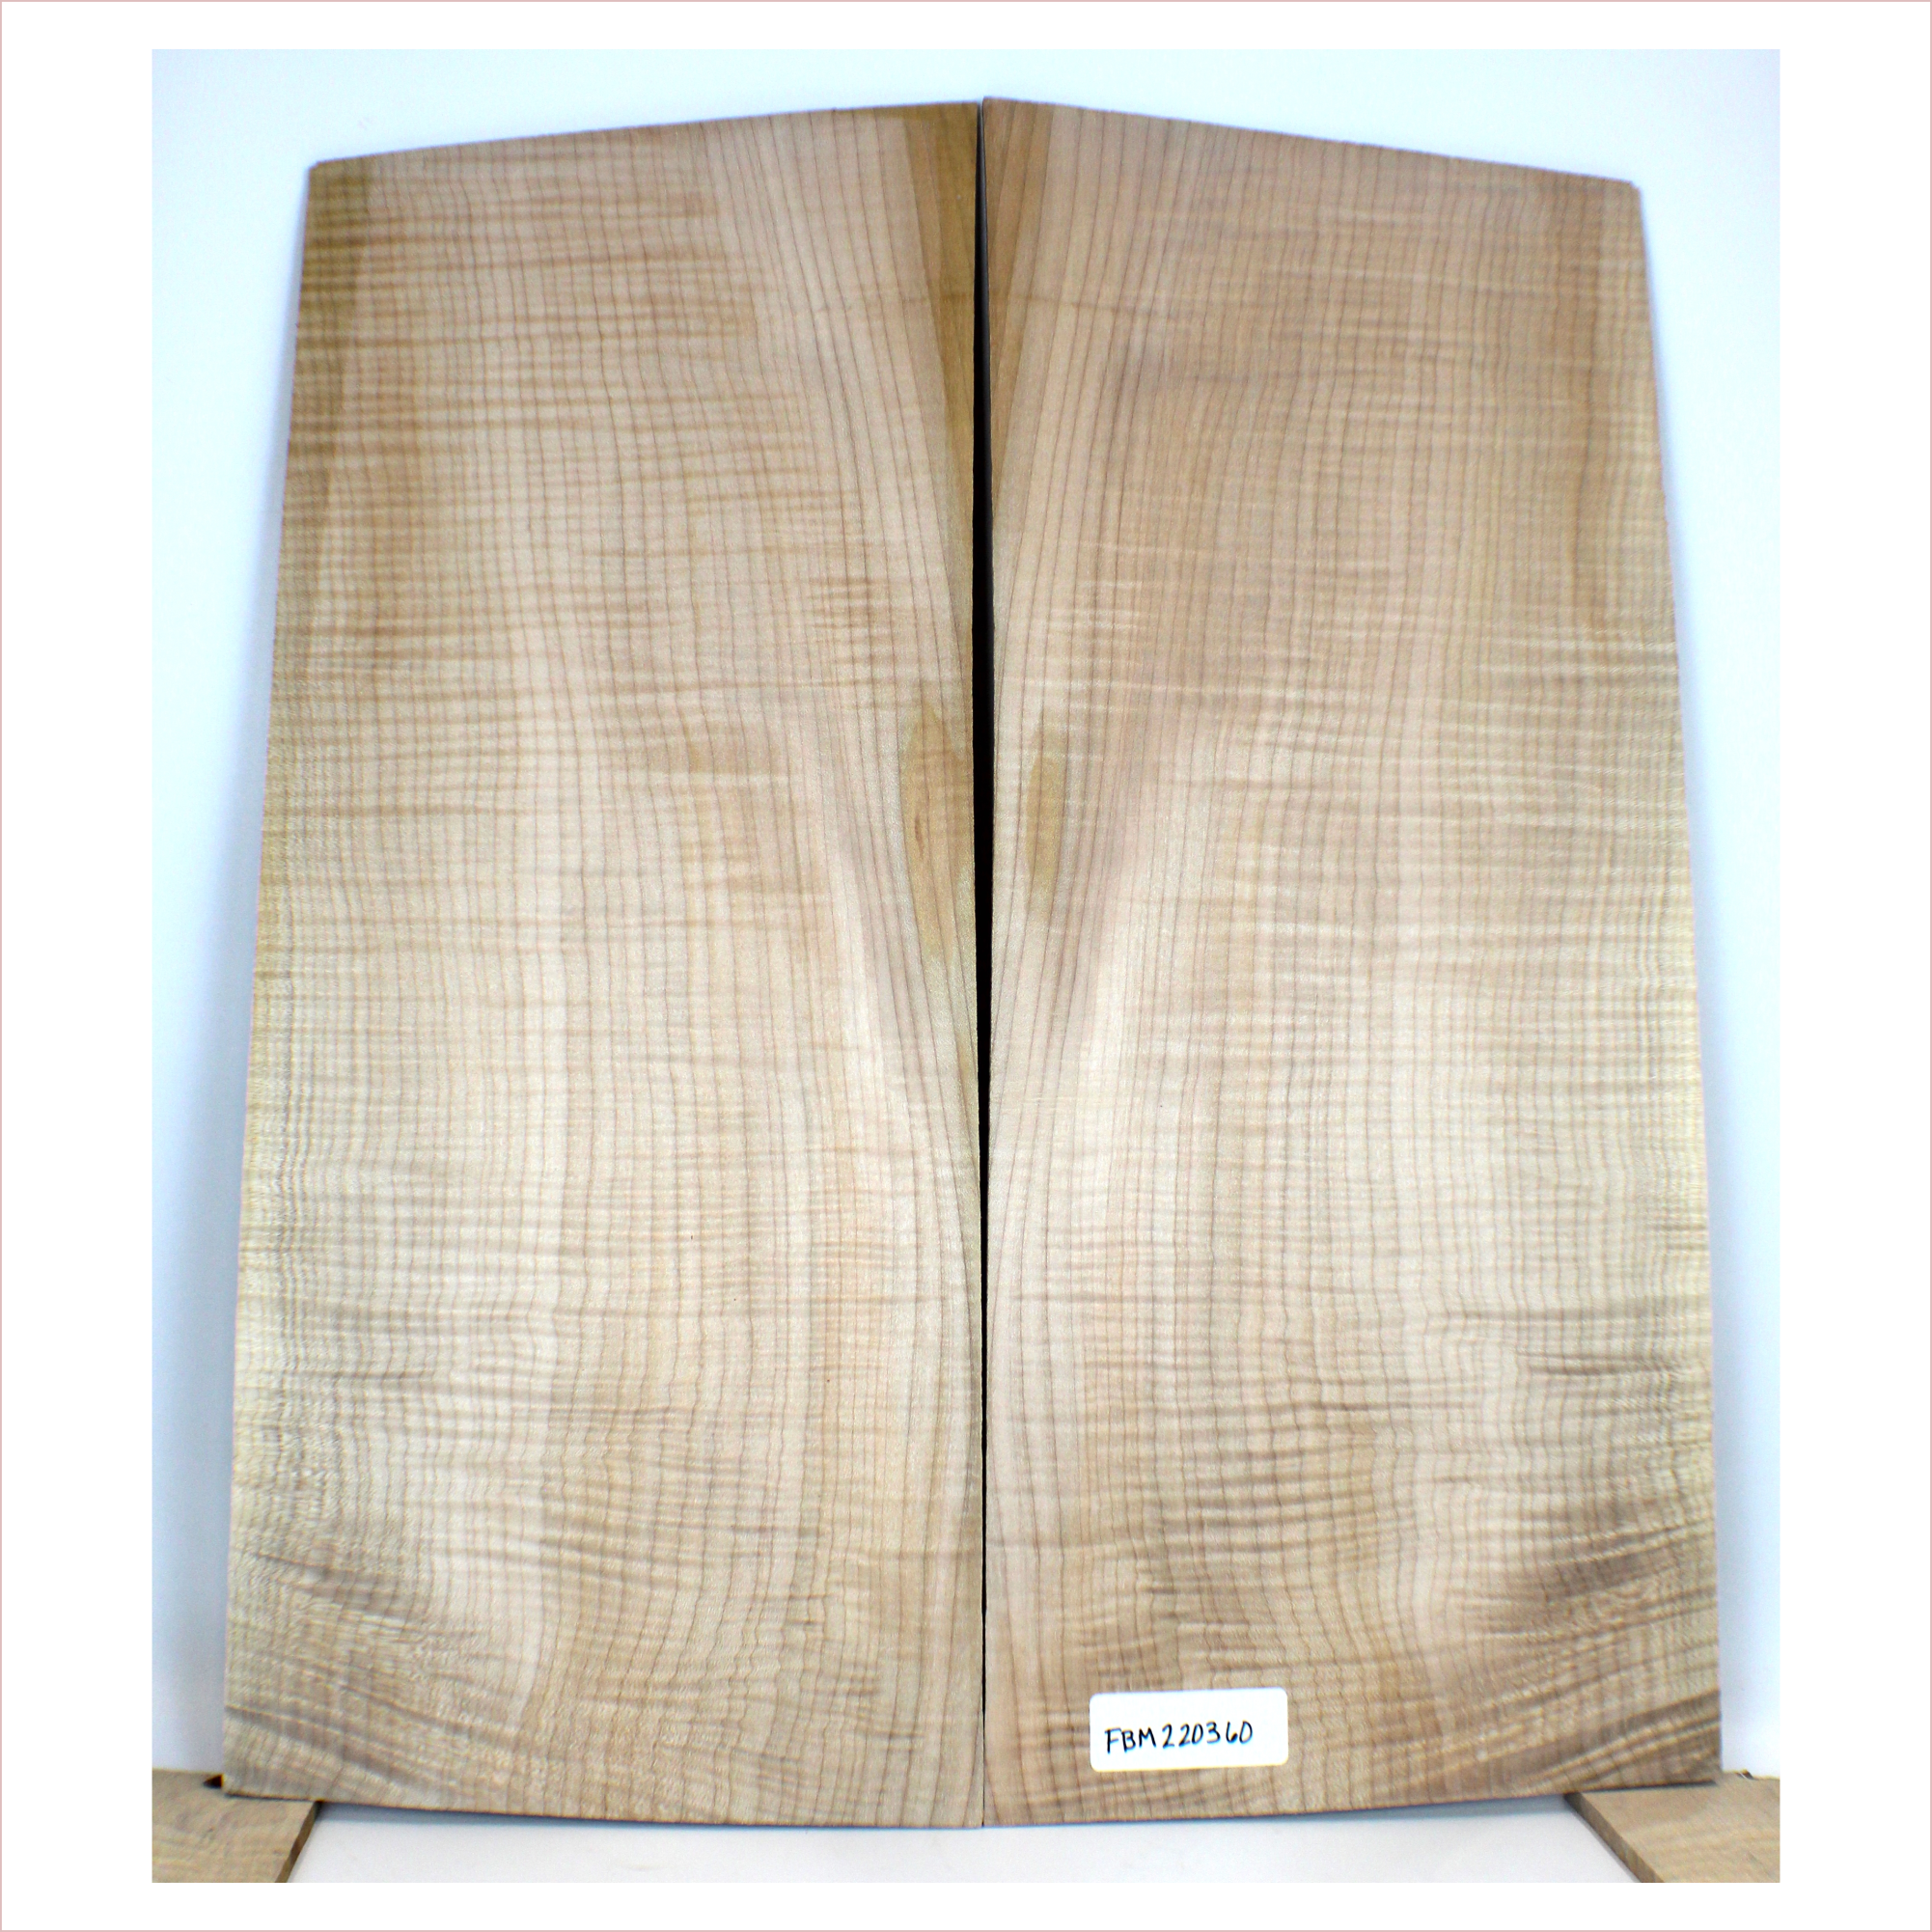 Music grade 3A flame maple set with well-quartered light figure throughout and no defect.  This set has been sanded to 400 grit.  Dimensions: Thickness (each piece): .25